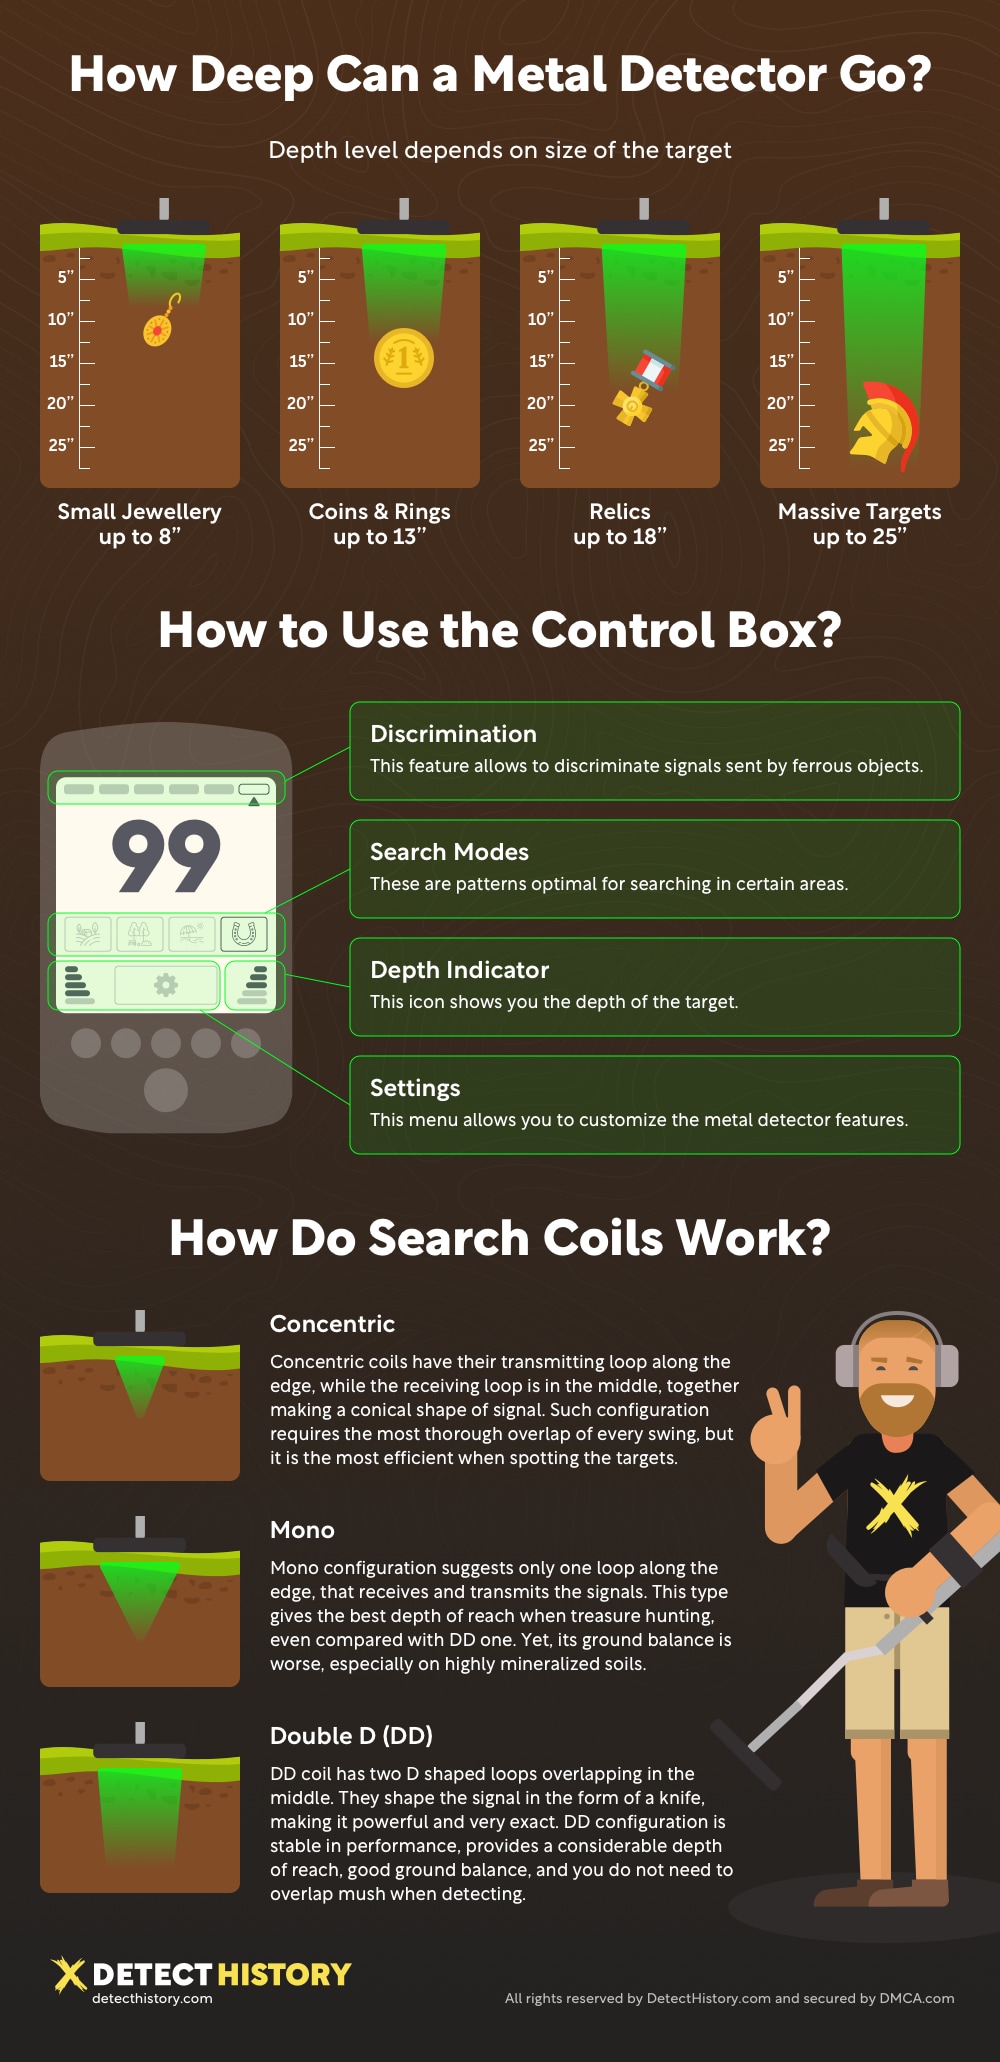 Top 3 Questions About Metal Detectors - Infographic